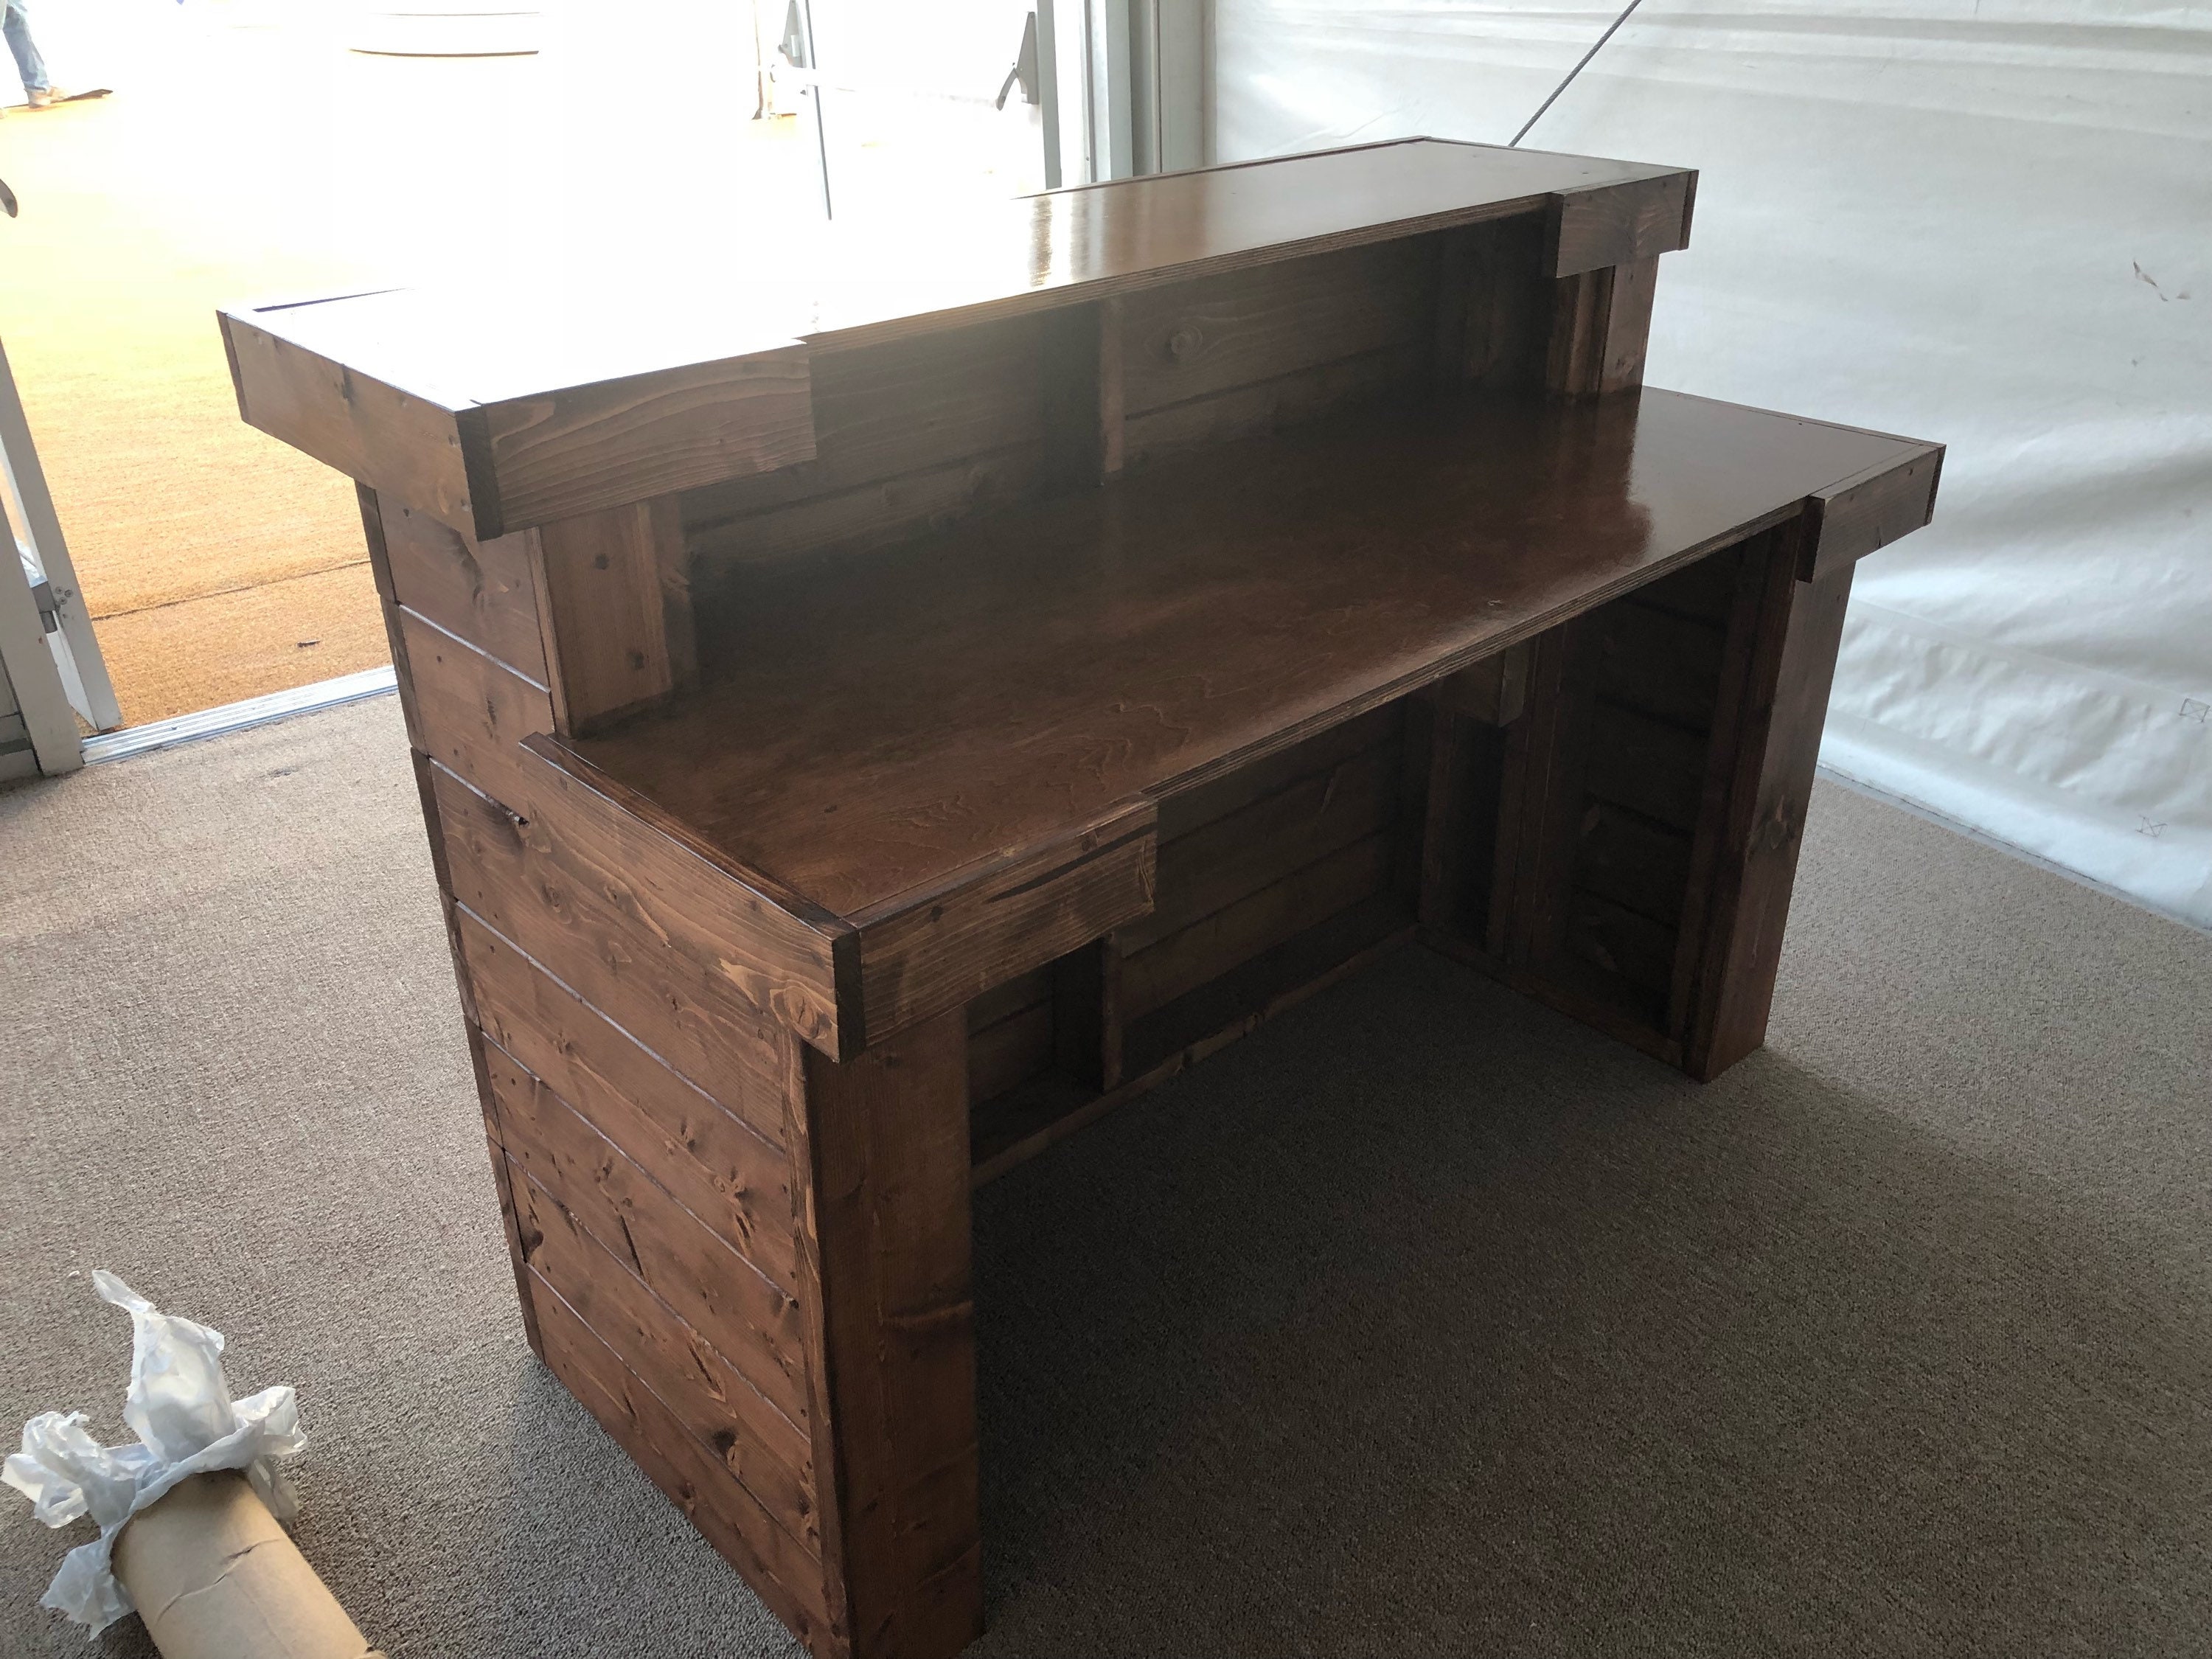 Custom Canyon Reception Desk 7 Foot Pallet Style Or Barn Wood